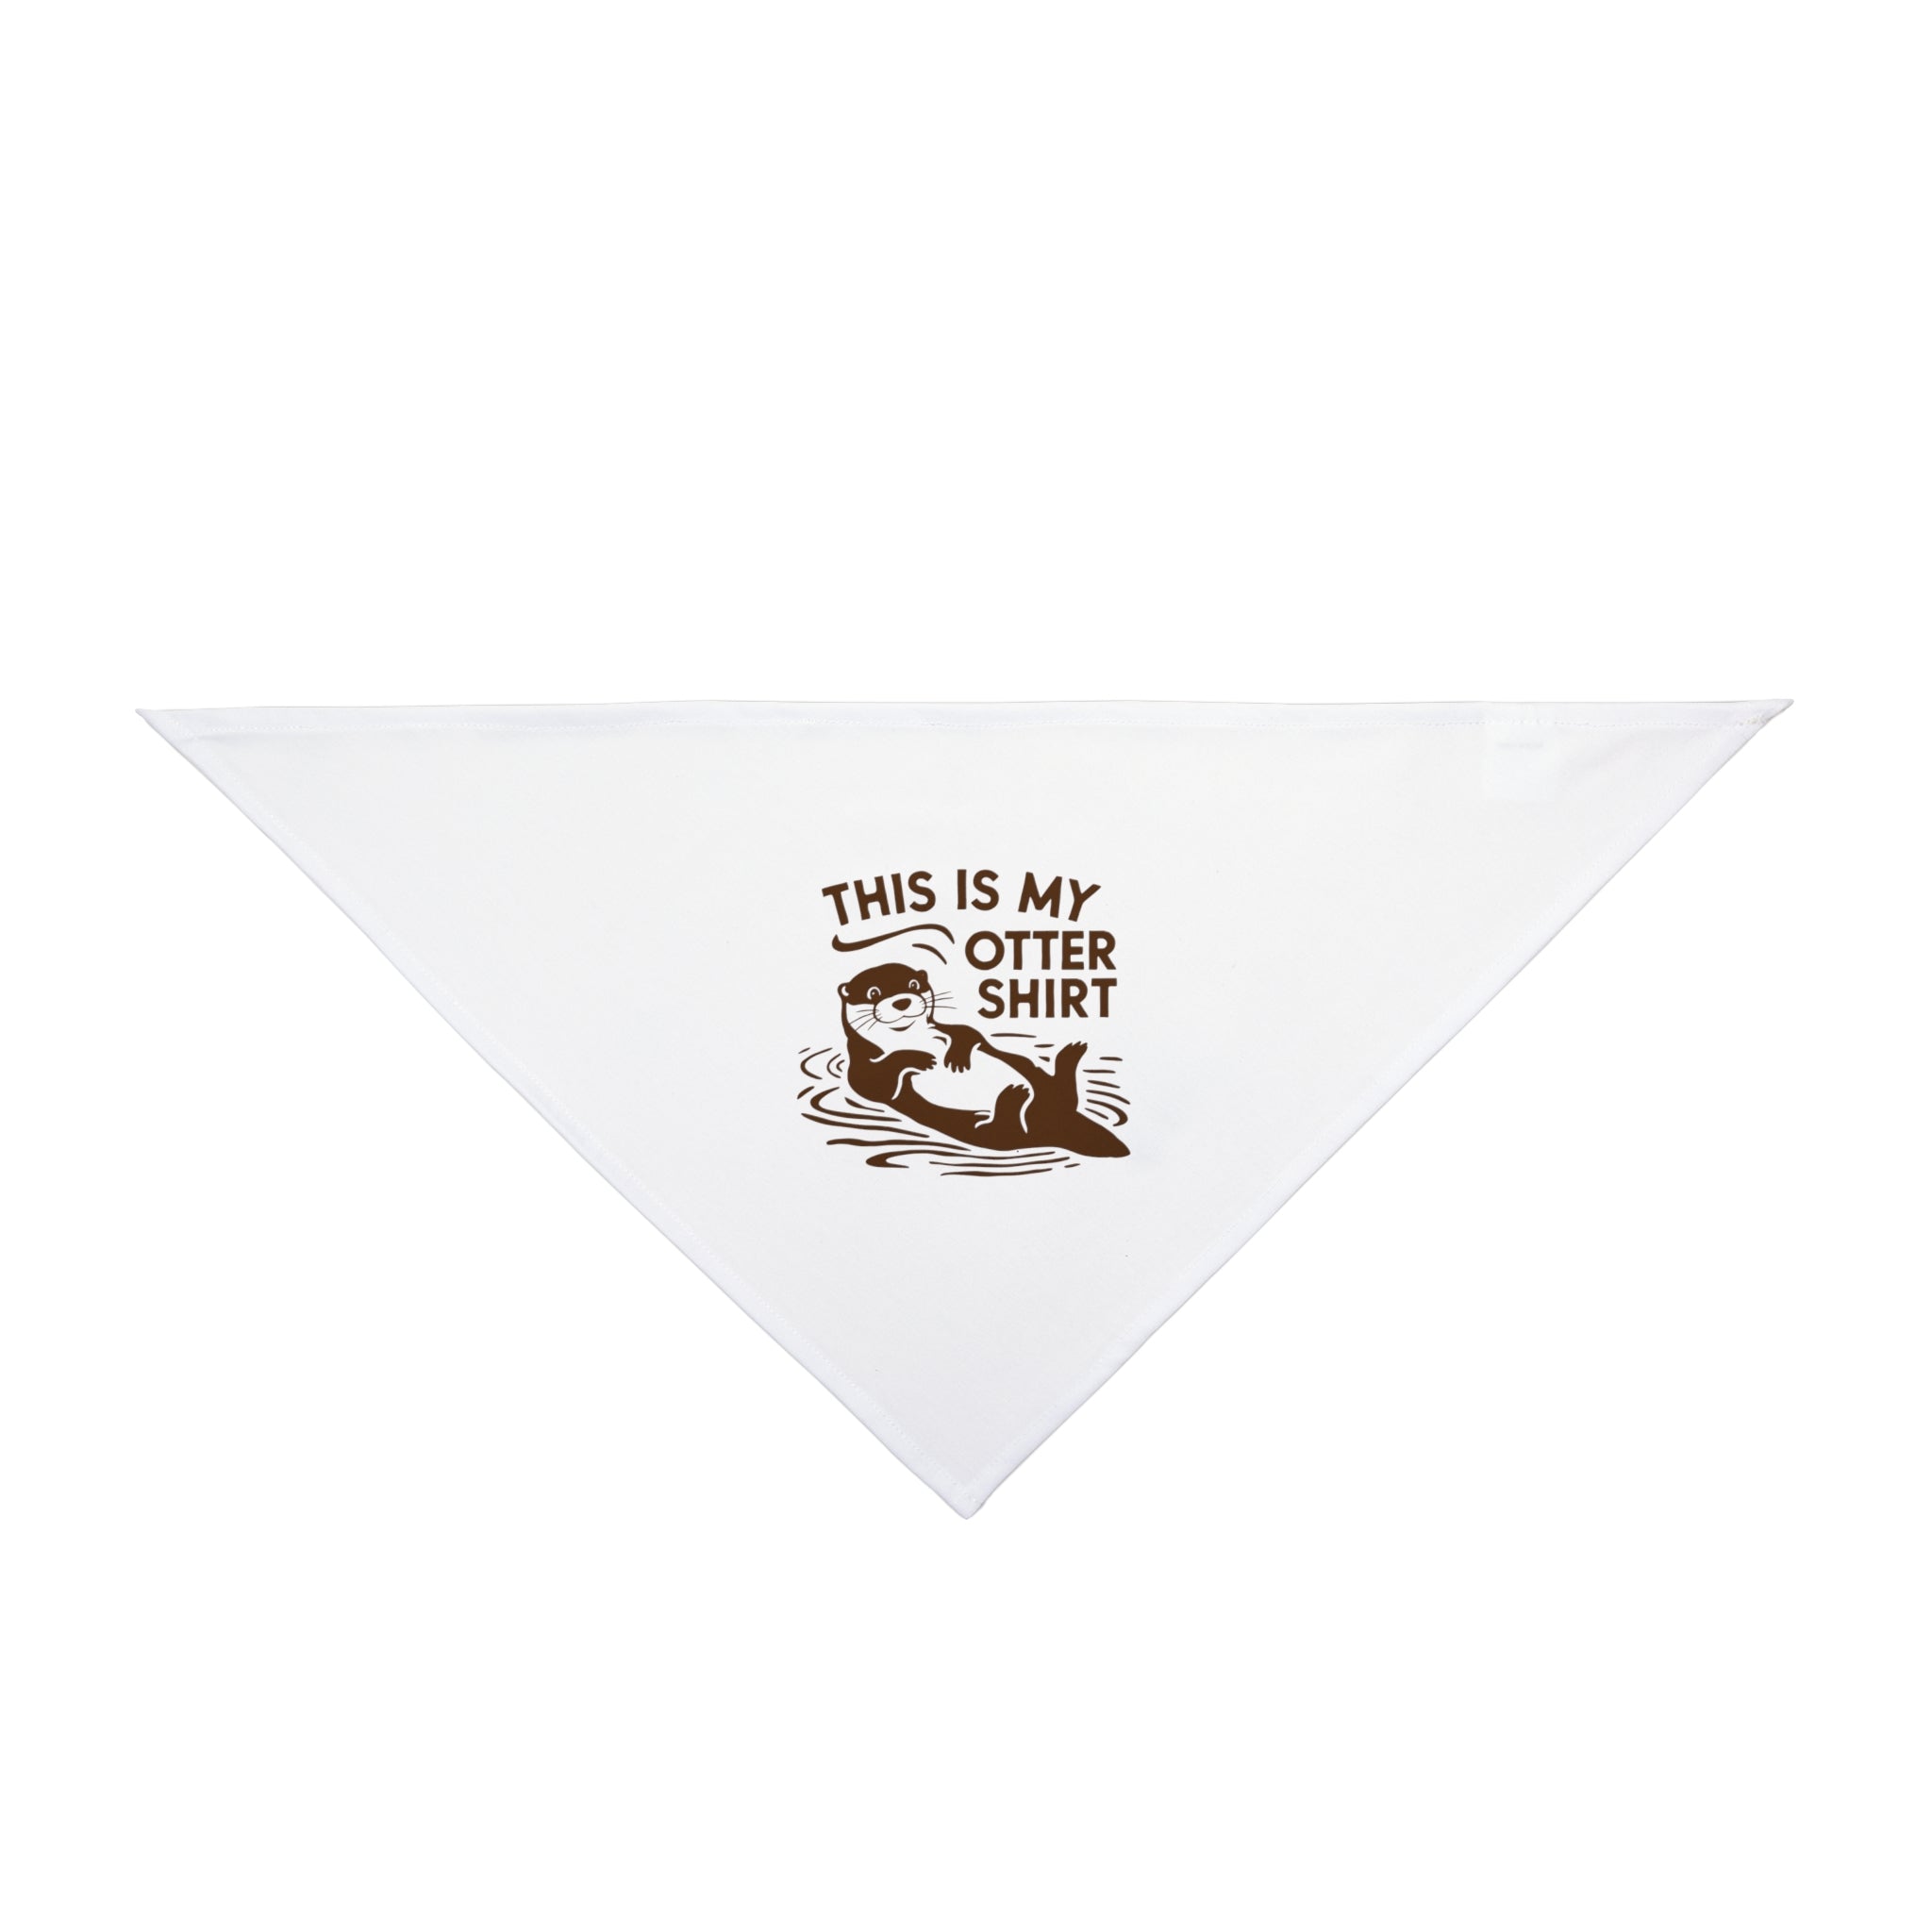 A My Otter Shirt - Pet Bandana in a white triangular shape, featuring the playful graphic of an otter and the text "This is my otter shirt" printed in brown. Perfect as a pet accessory from the My Otter Shirt designs collection.